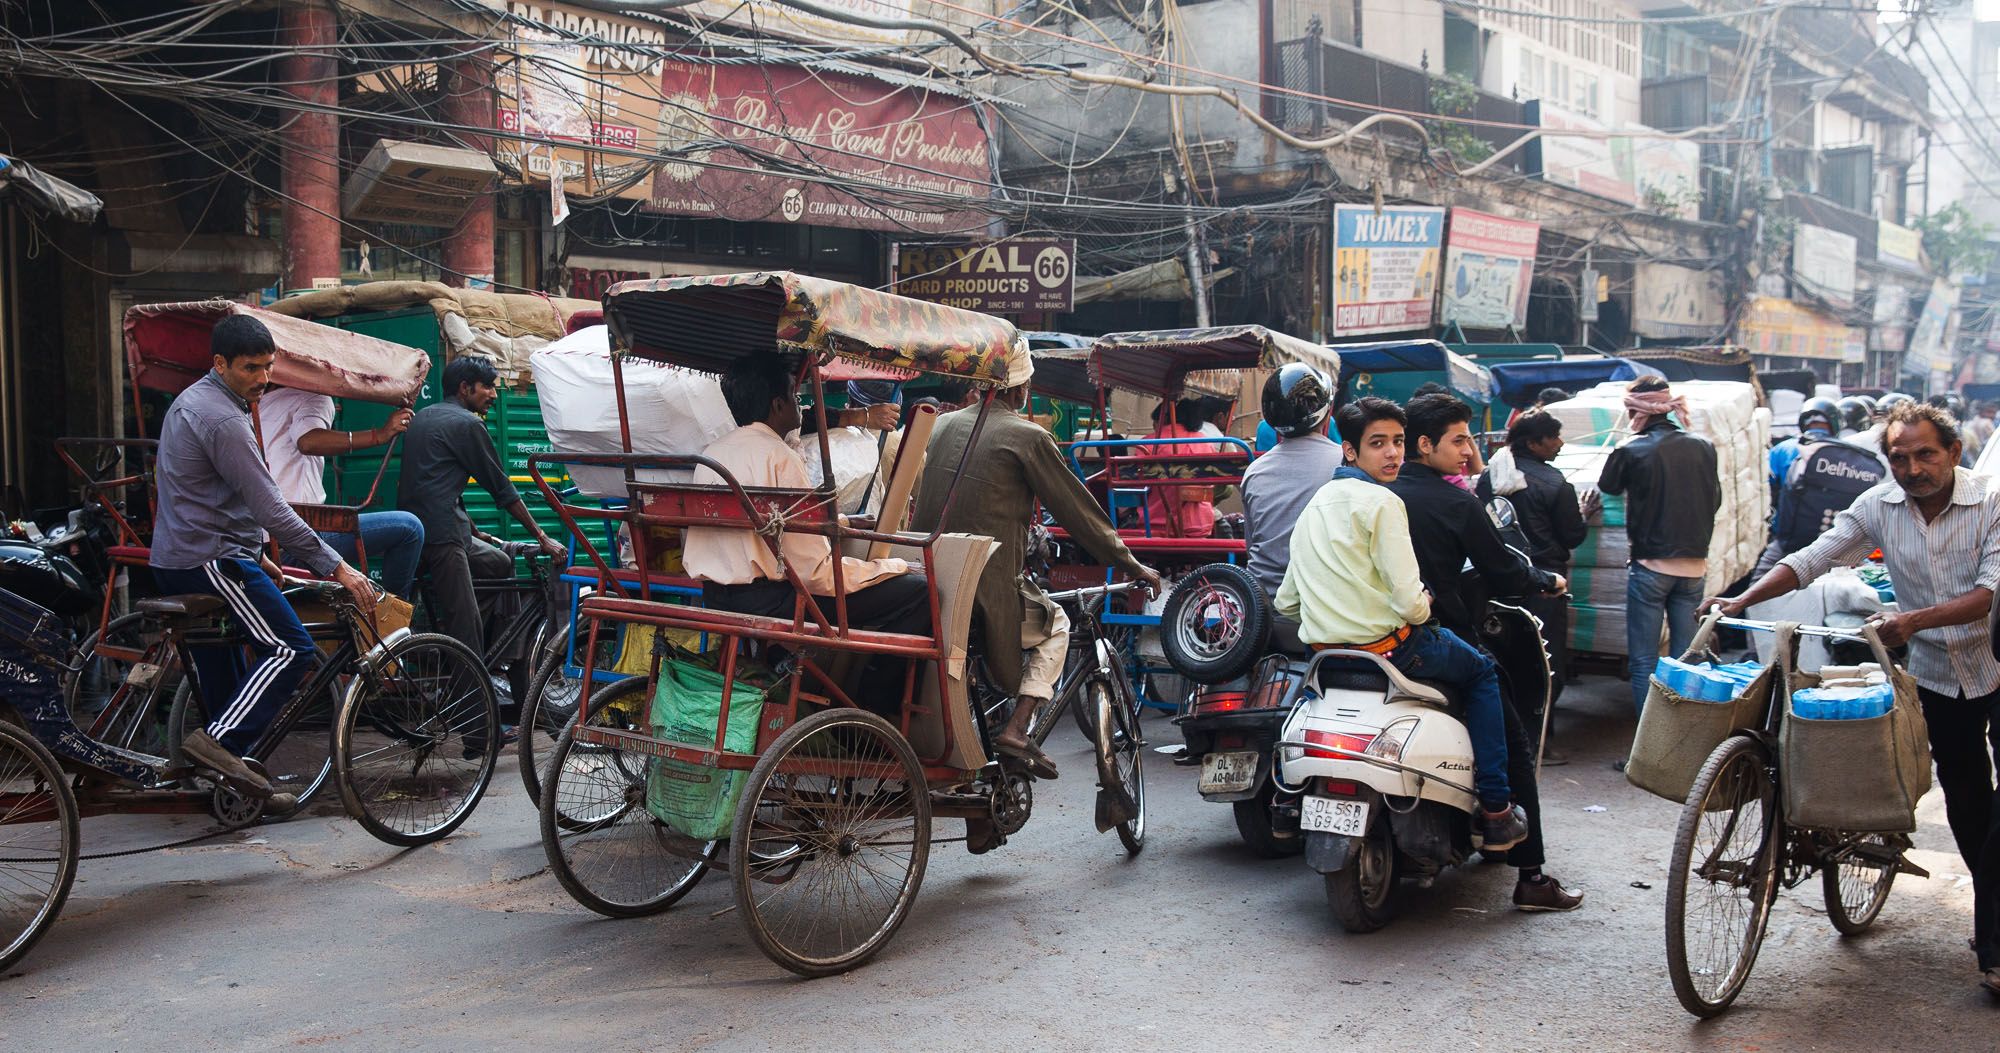 Featured image for “Walking Through Chaotic Old Delhi, India”